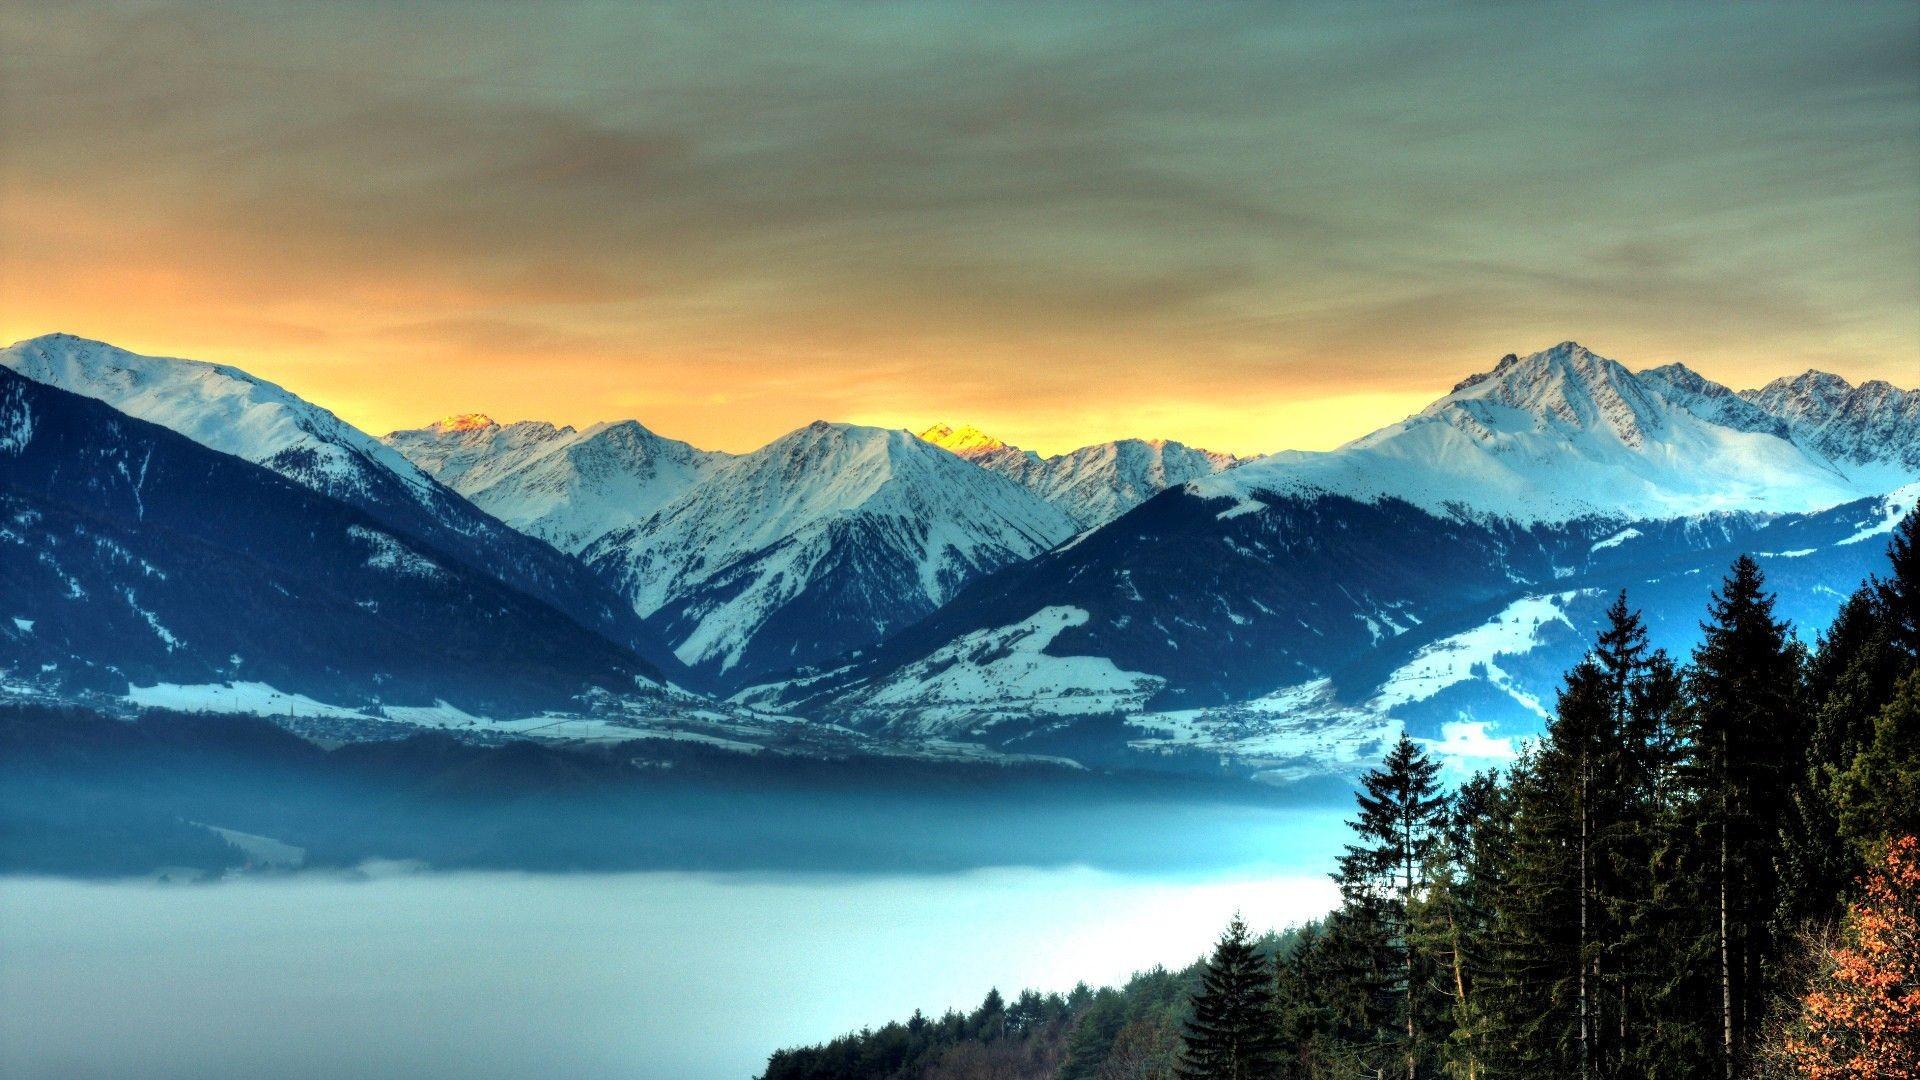 Mountain Range Wallpaper background picture